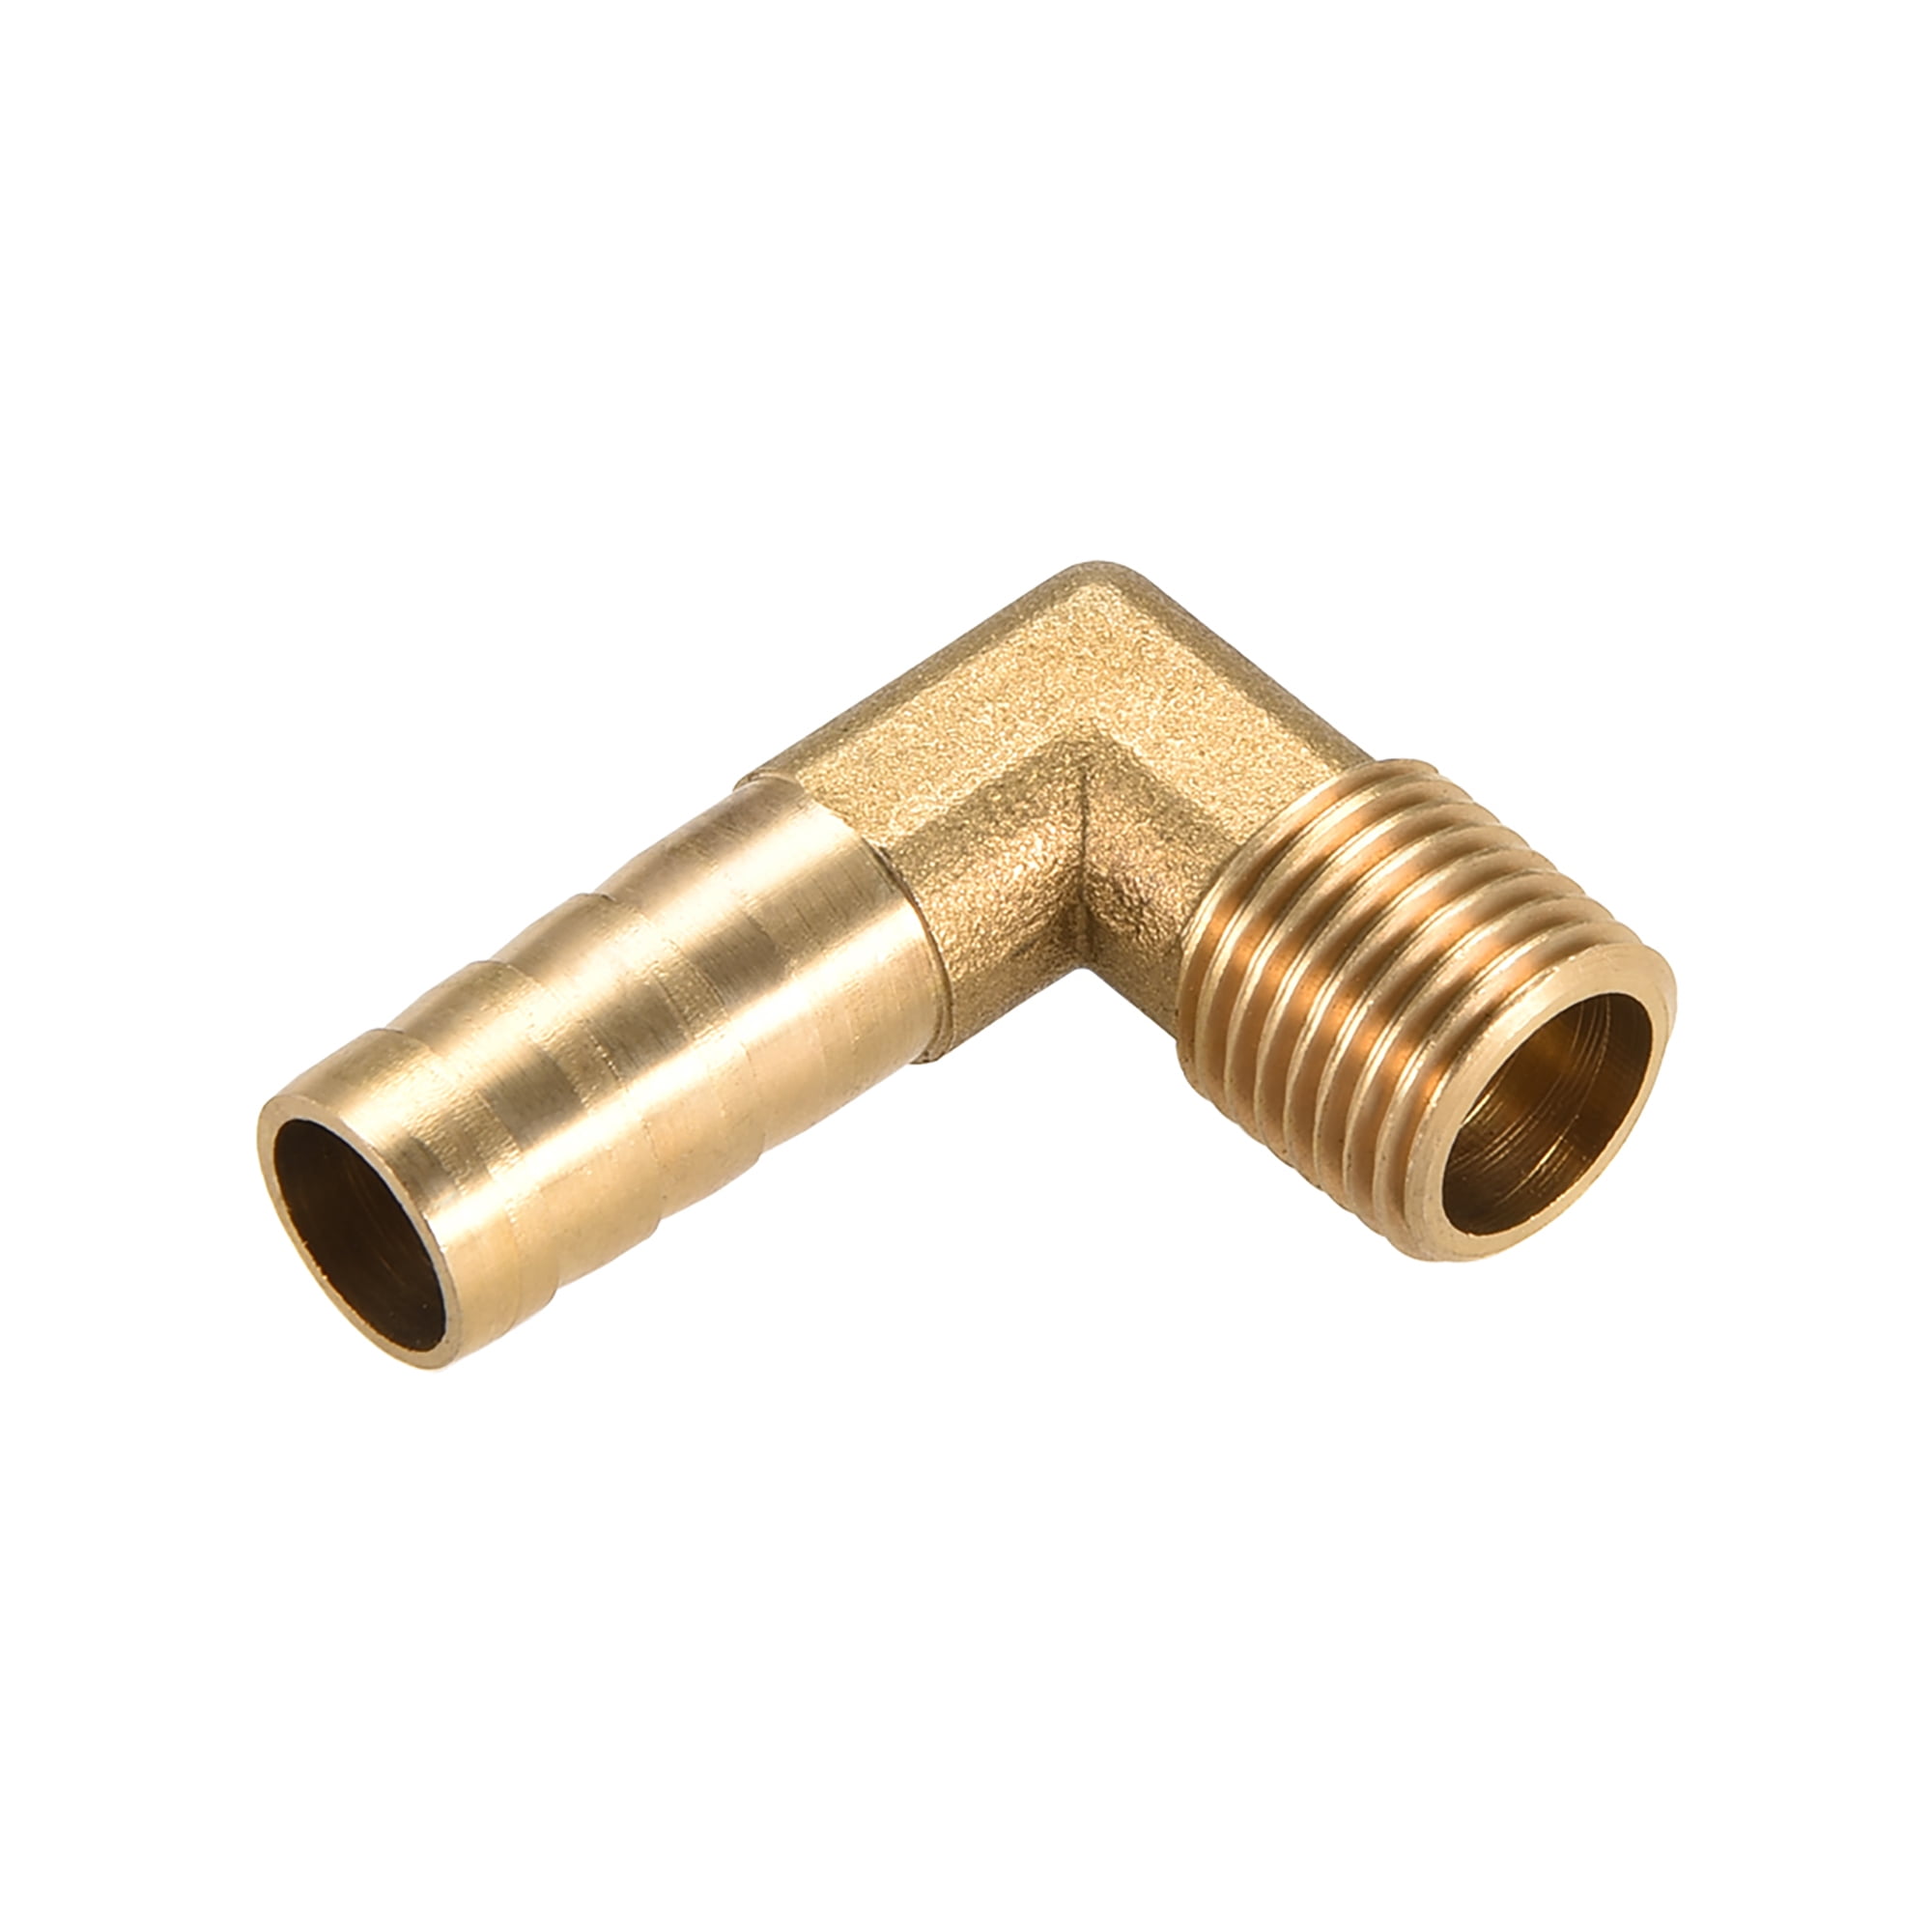 Brass Barb Hose Fitting 90 Degree Elbow 6mm Barbed x 1/4 PT Male